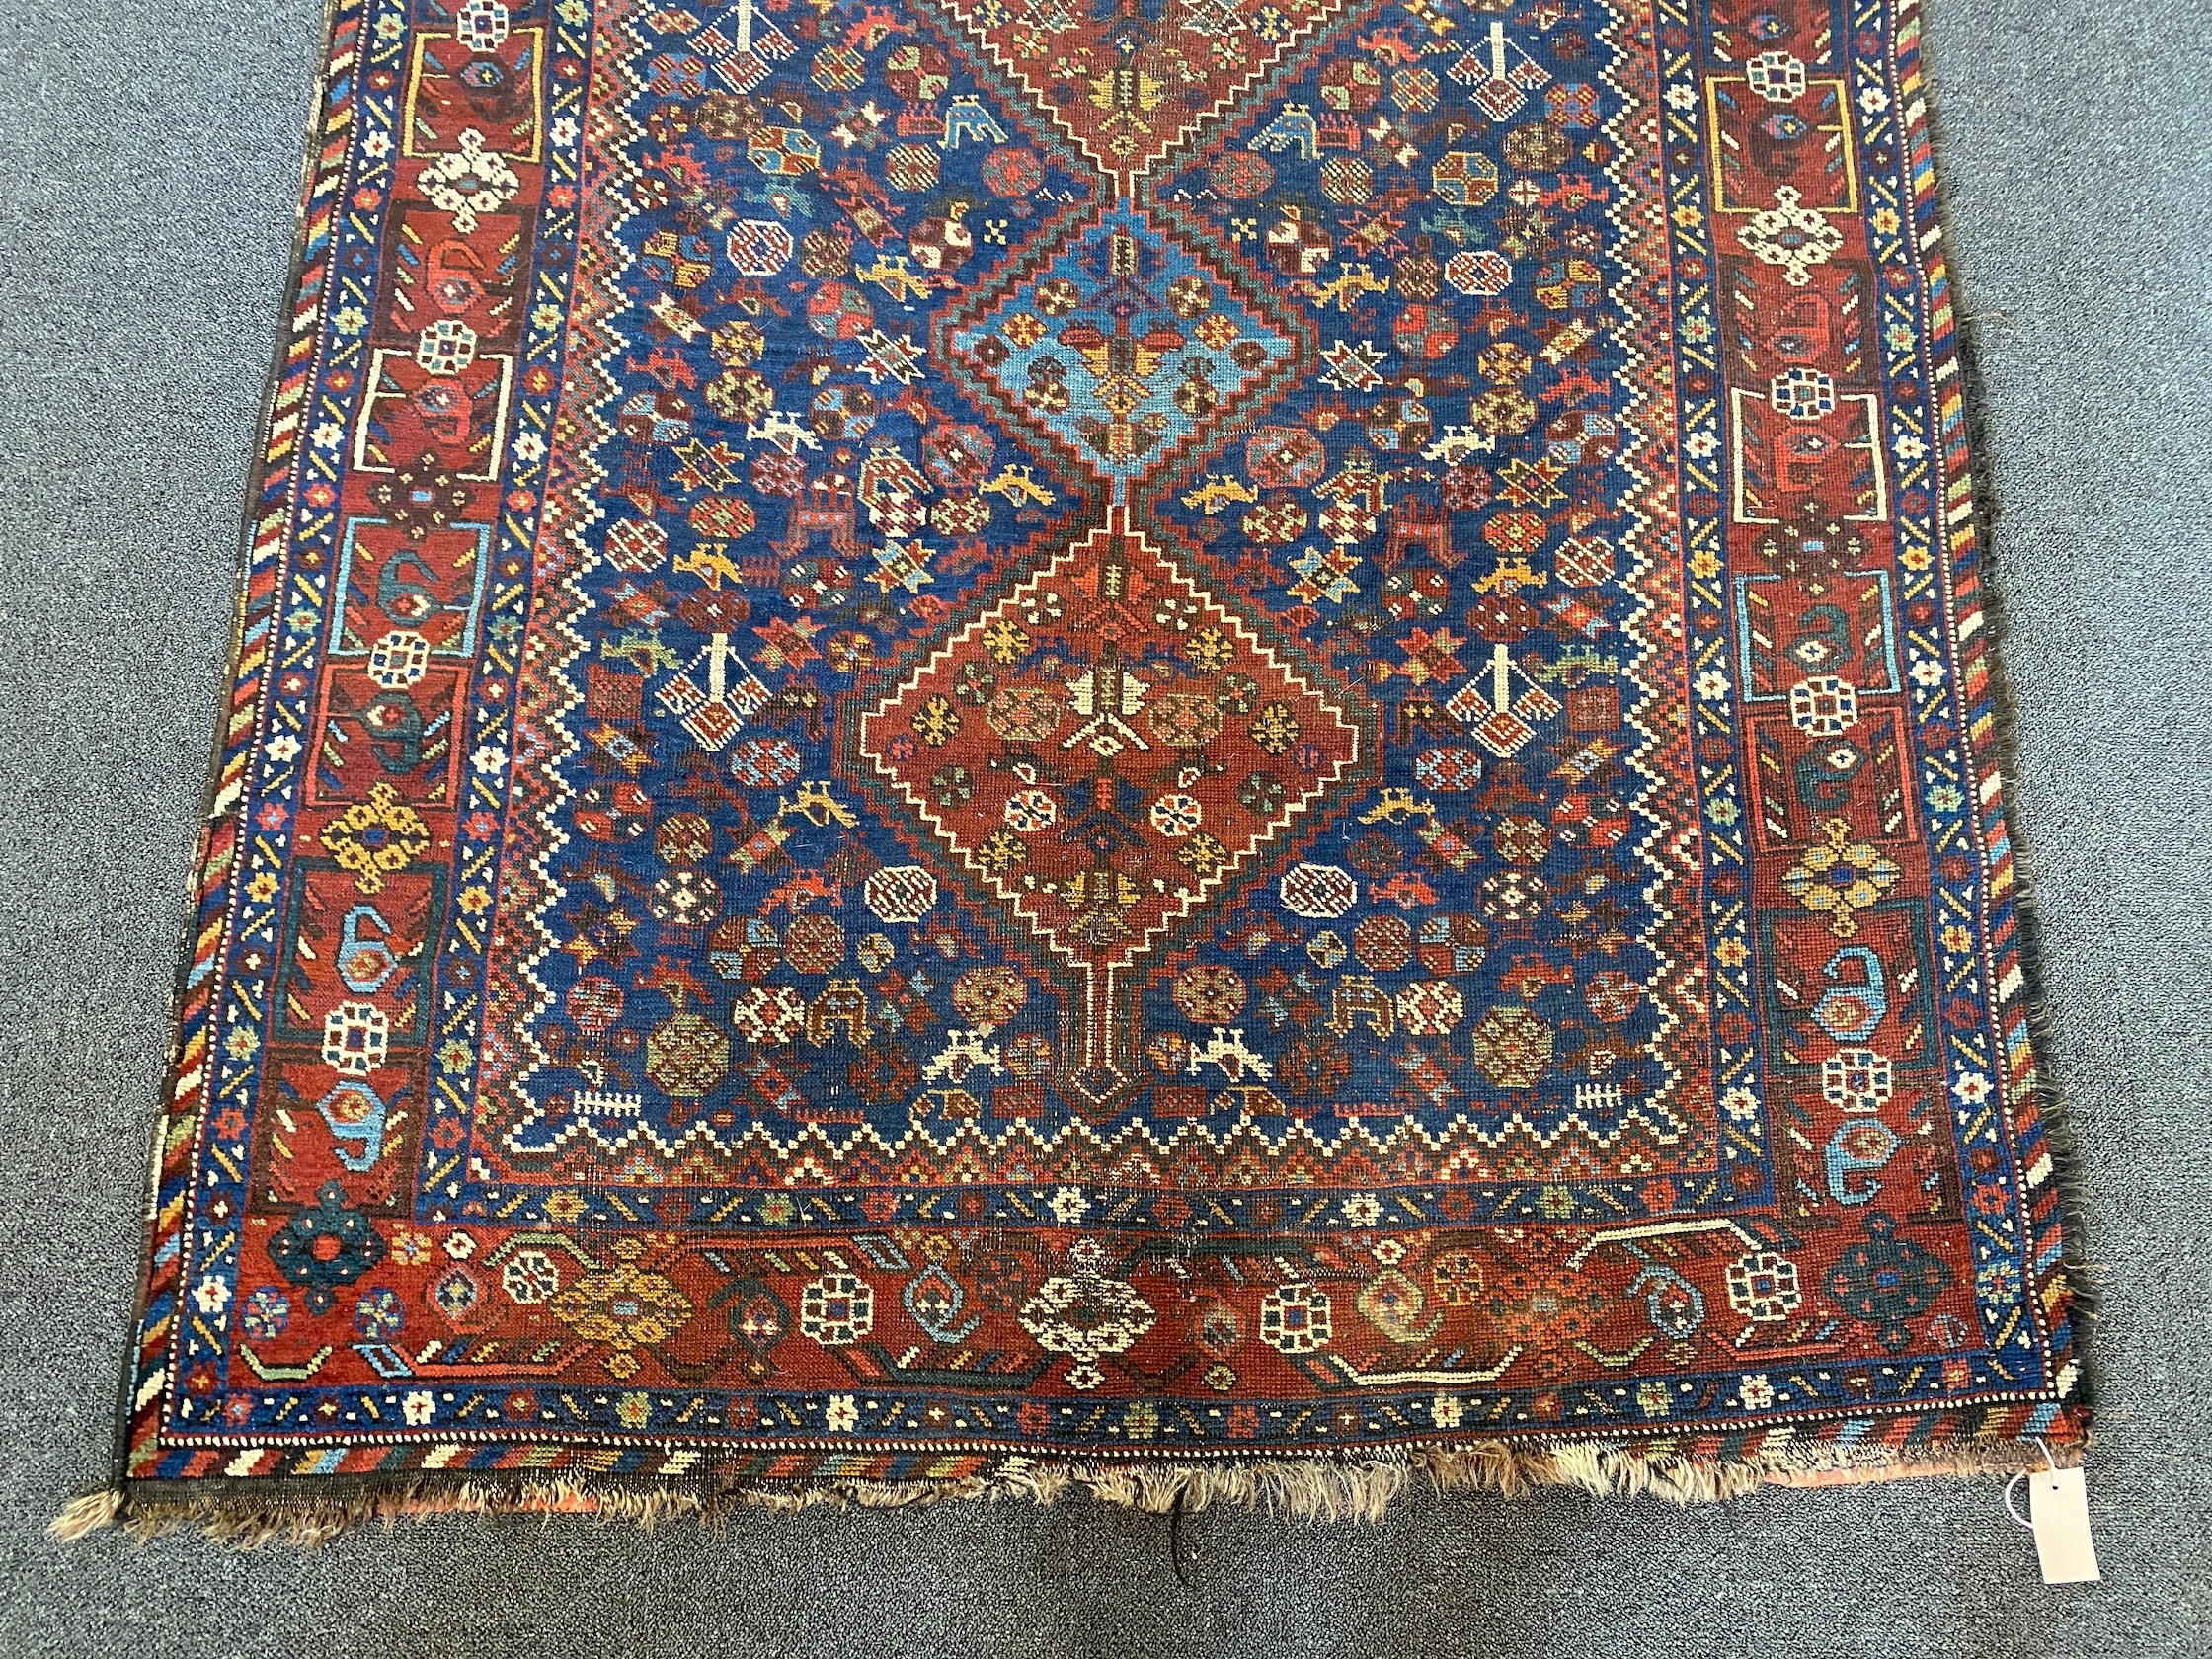 A Shiraz blue ground rug with triple lozenge medallion and floral border 160 x 122 cms.